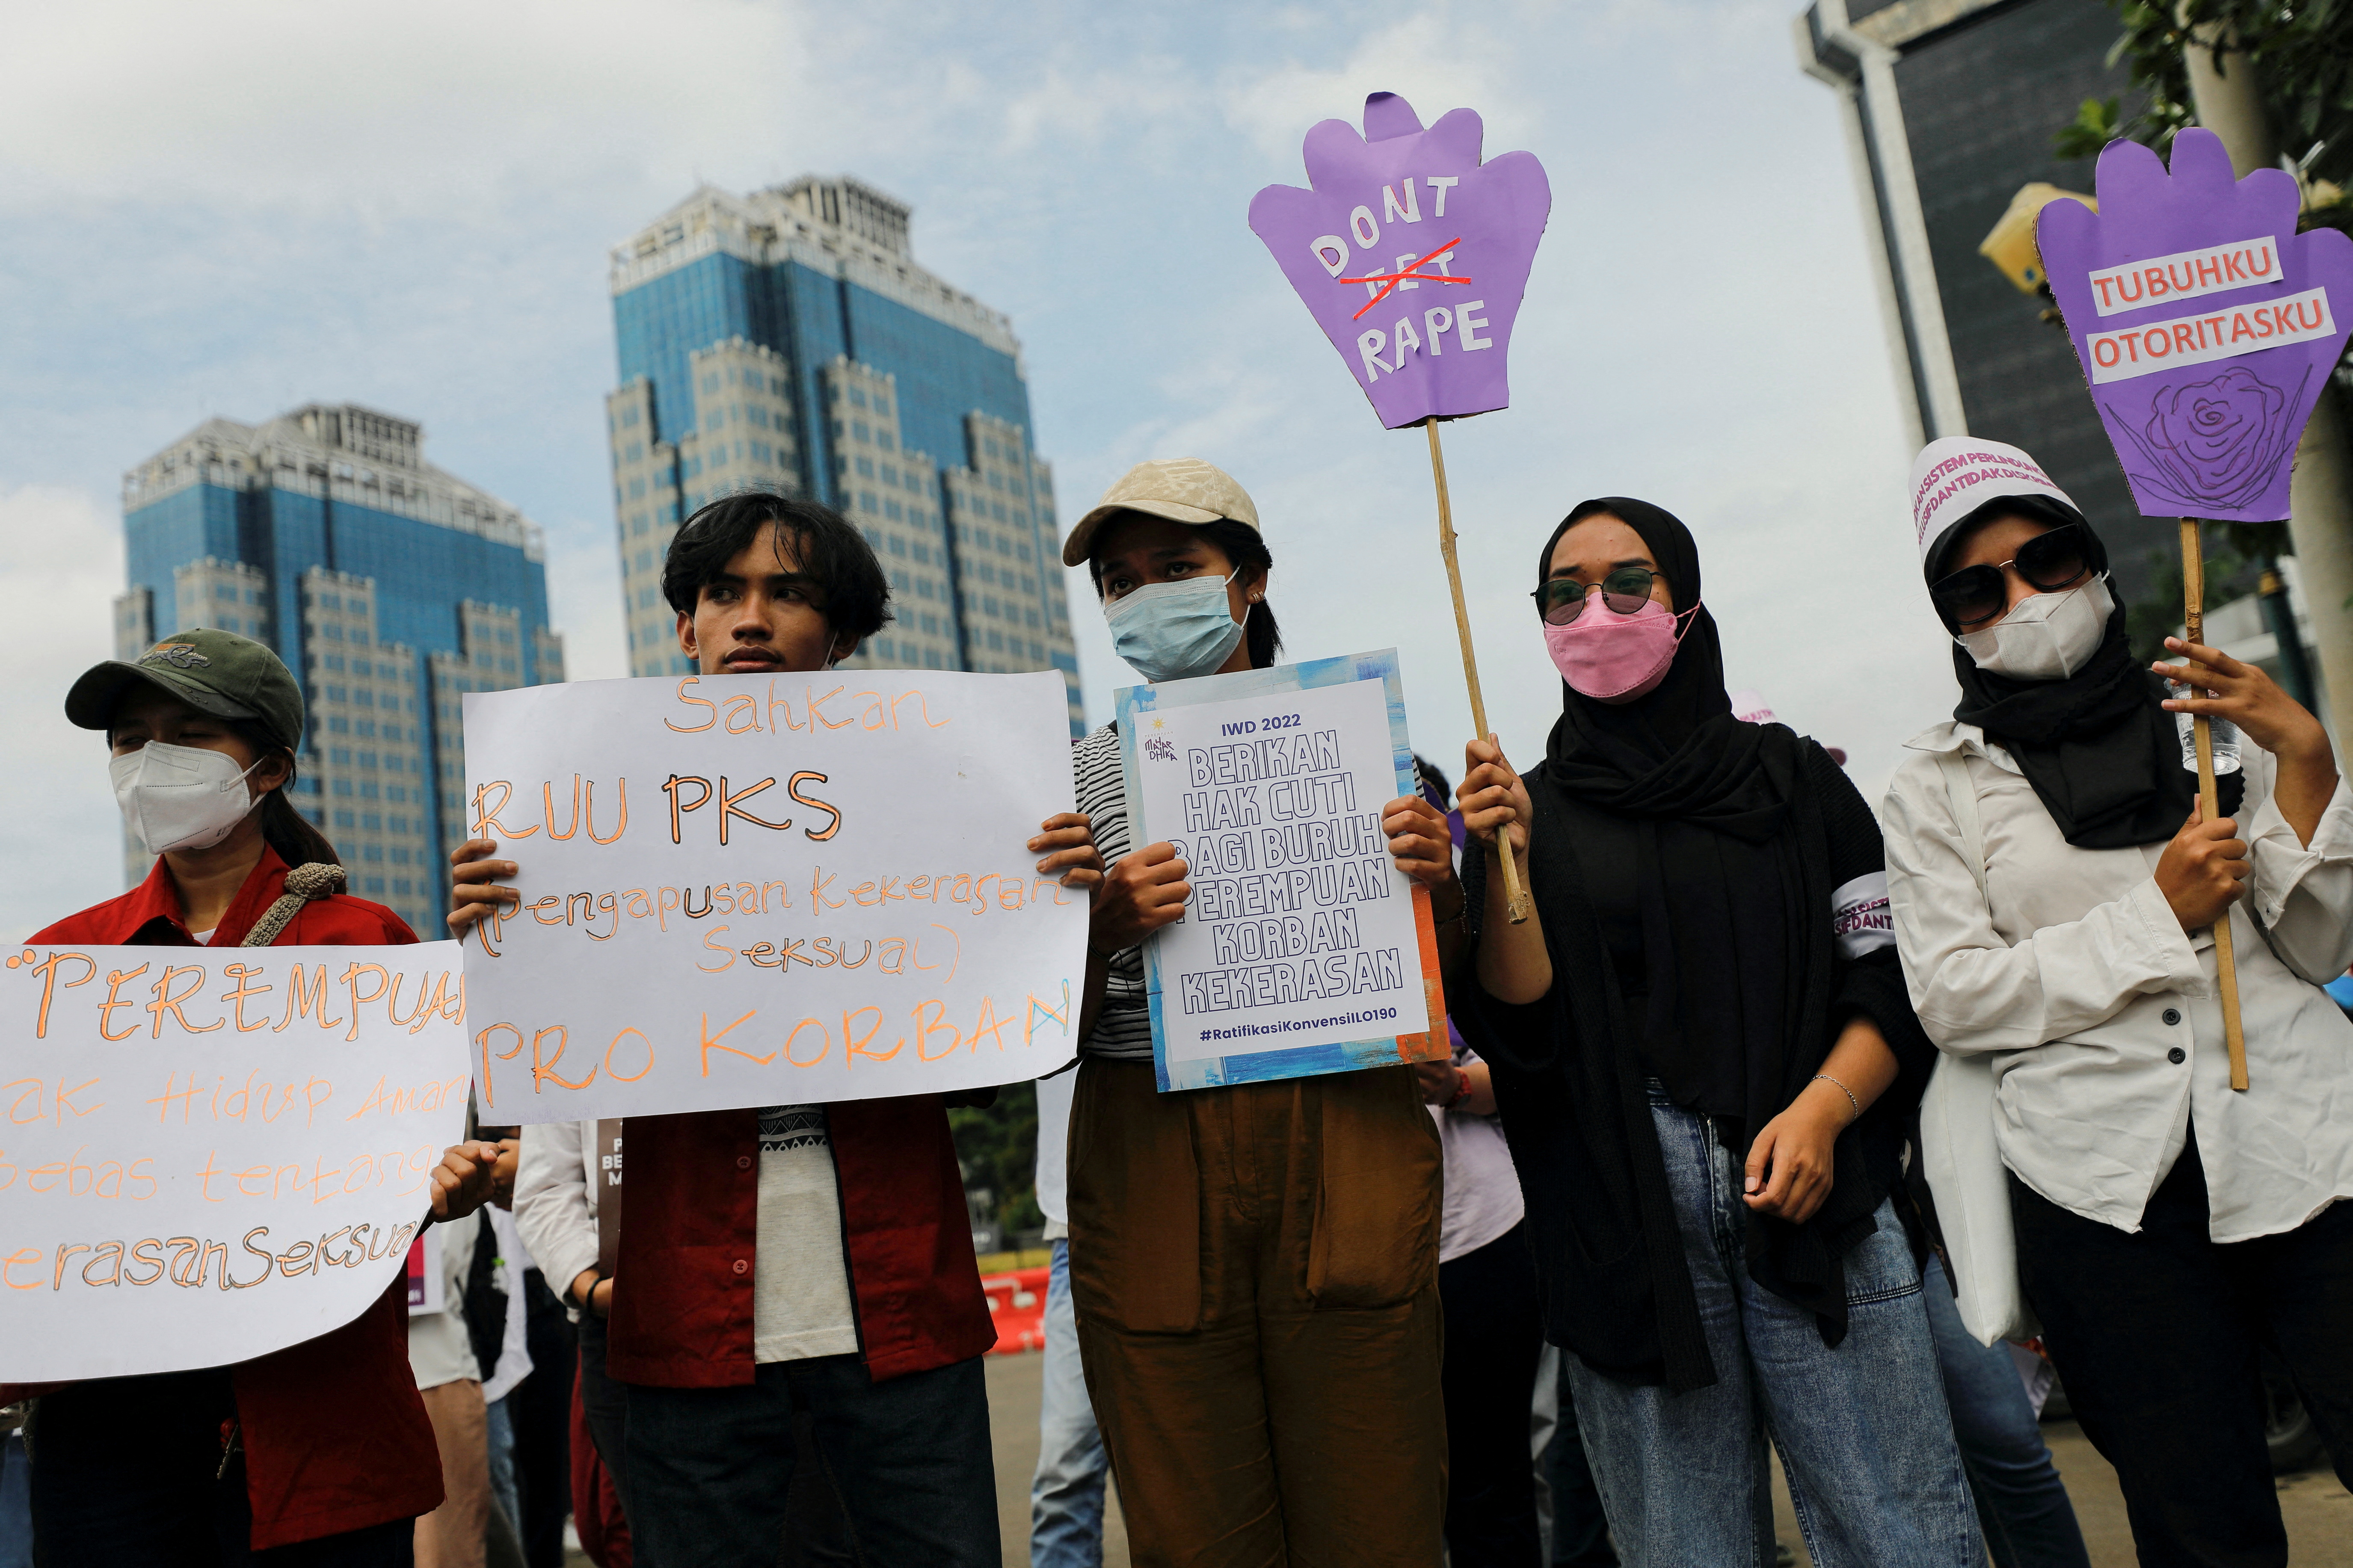 Activists carrying placards take part in a rally to support women's rights calling for gender equality and to protest against gender discrimination, during the International Women's Day outside the National Monument (Monas) complex in Jakarta